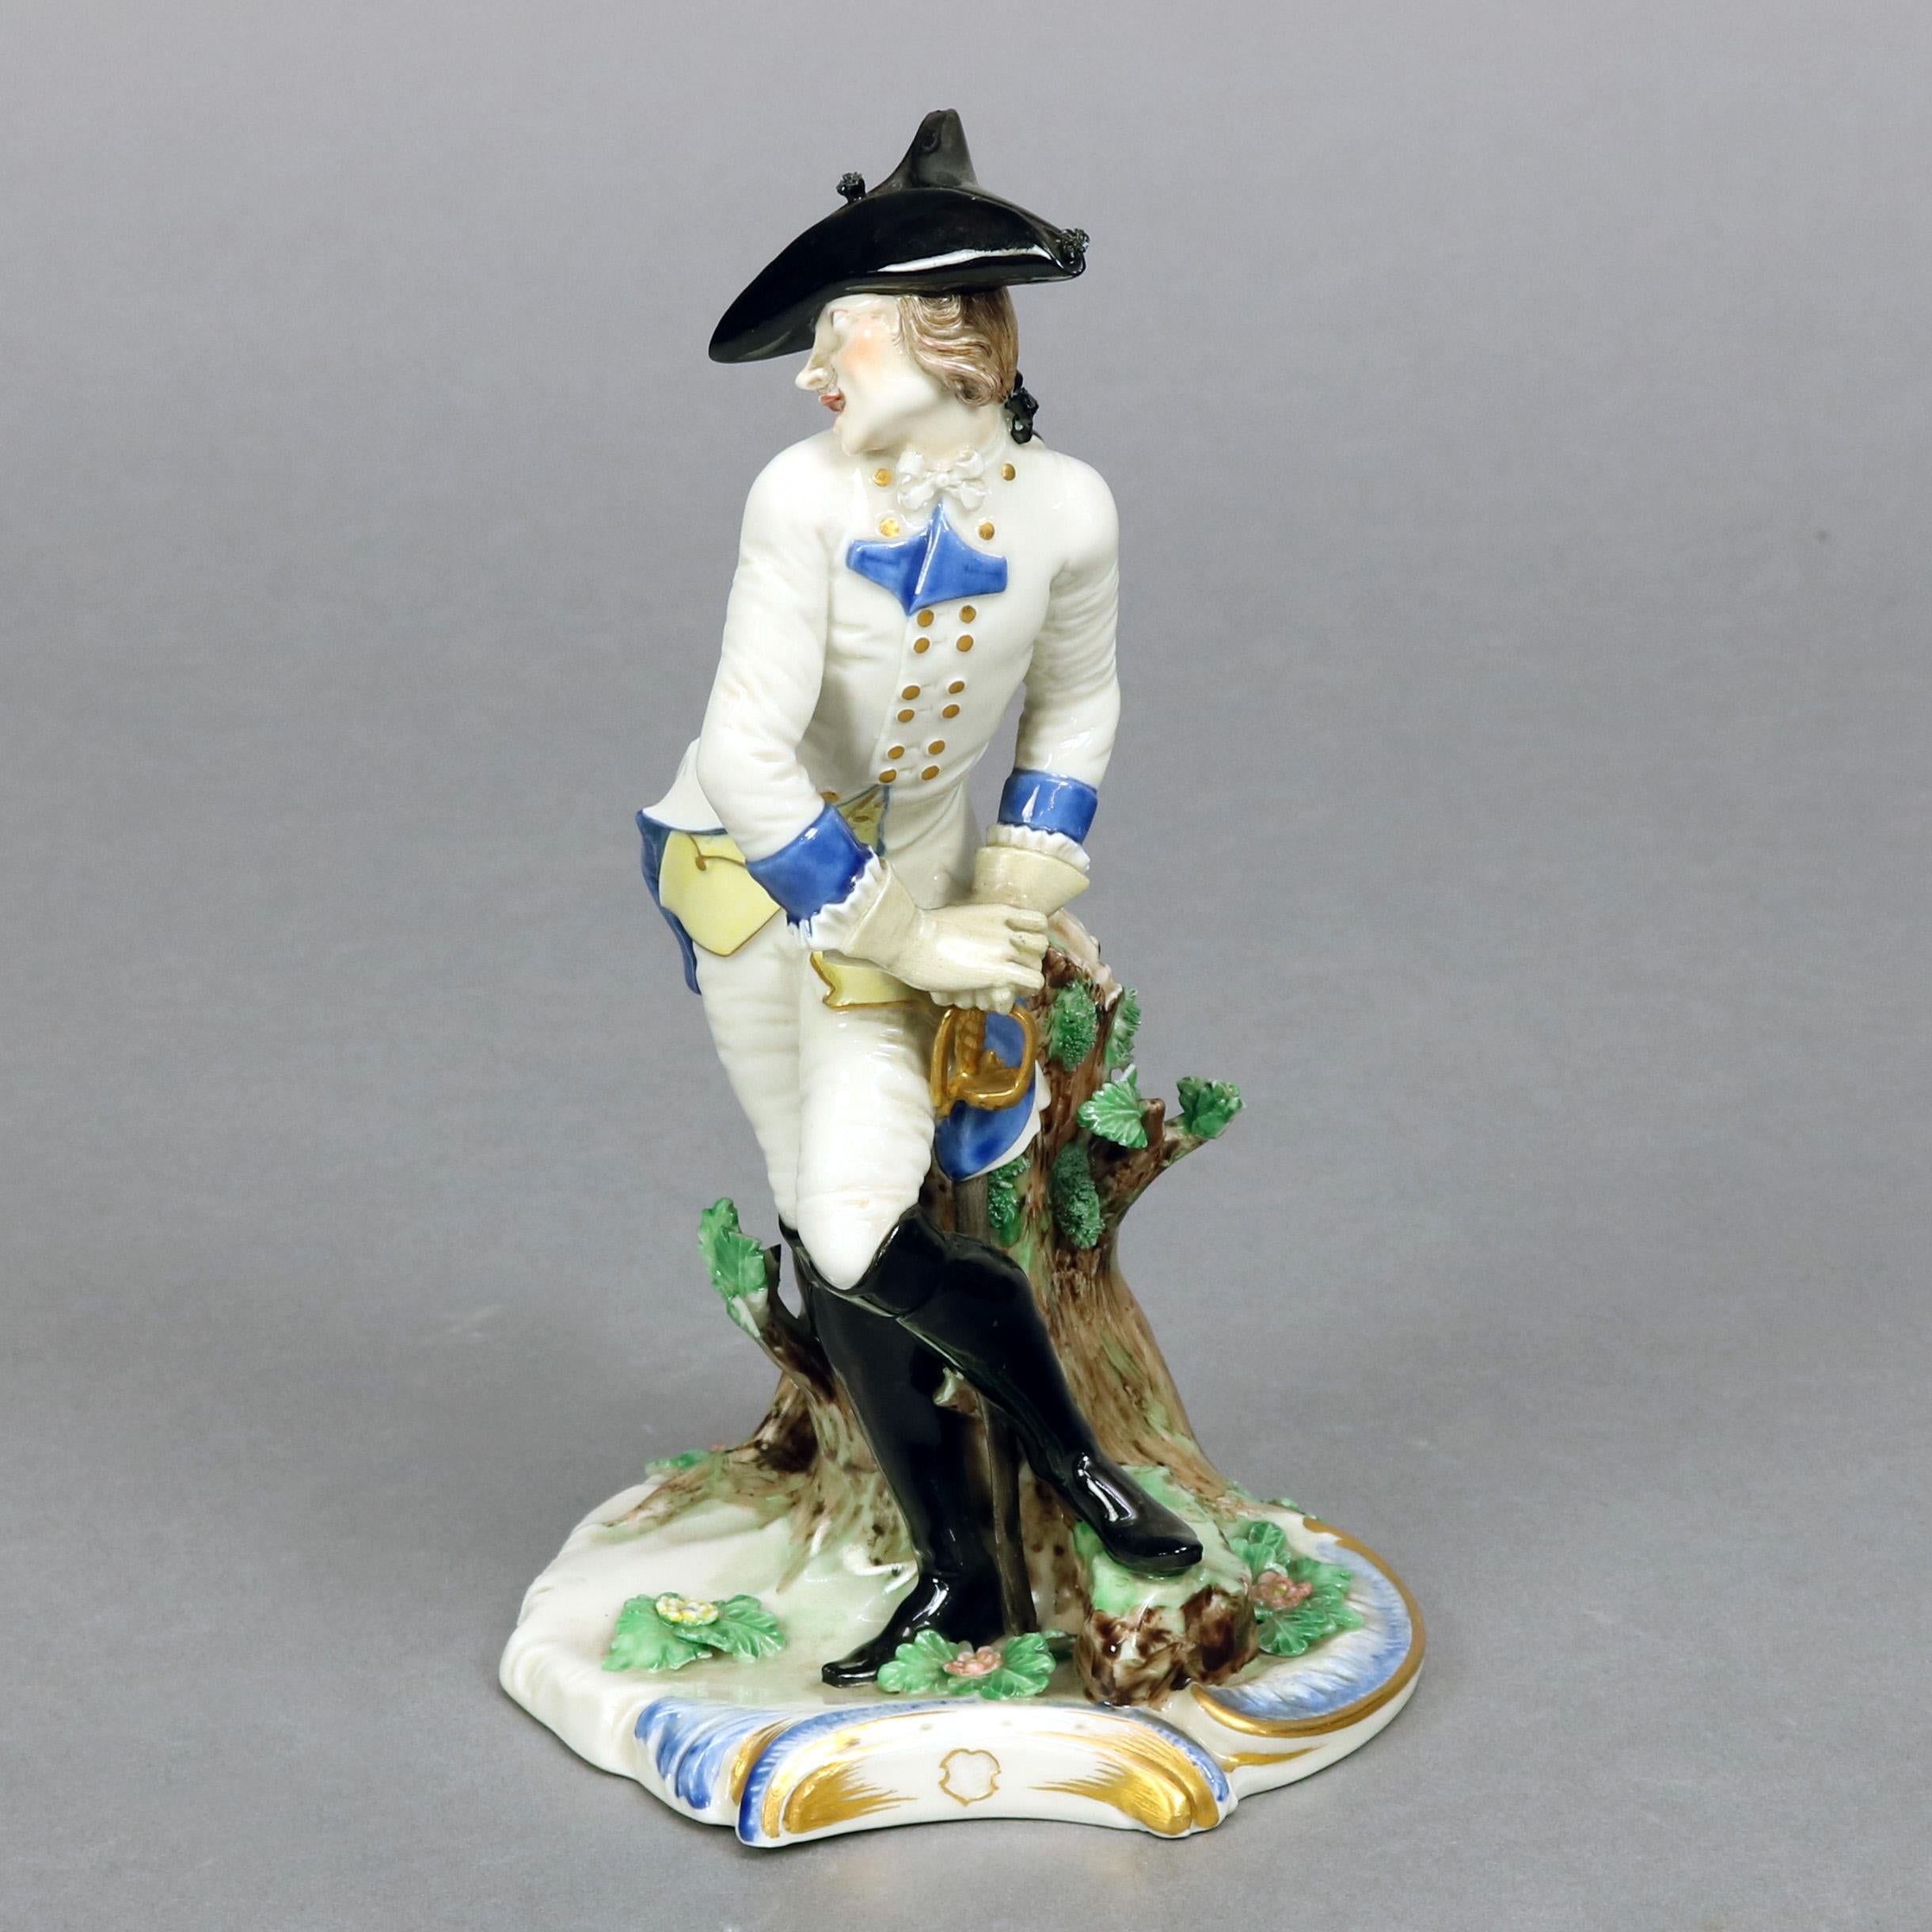 An antique German Meissen School porcelain portrait sculpture depicts hand painted and gilt full length figure of soldier posing in woodland setting, impressed mark on base as photographed, 20th century

Measures - 8.5